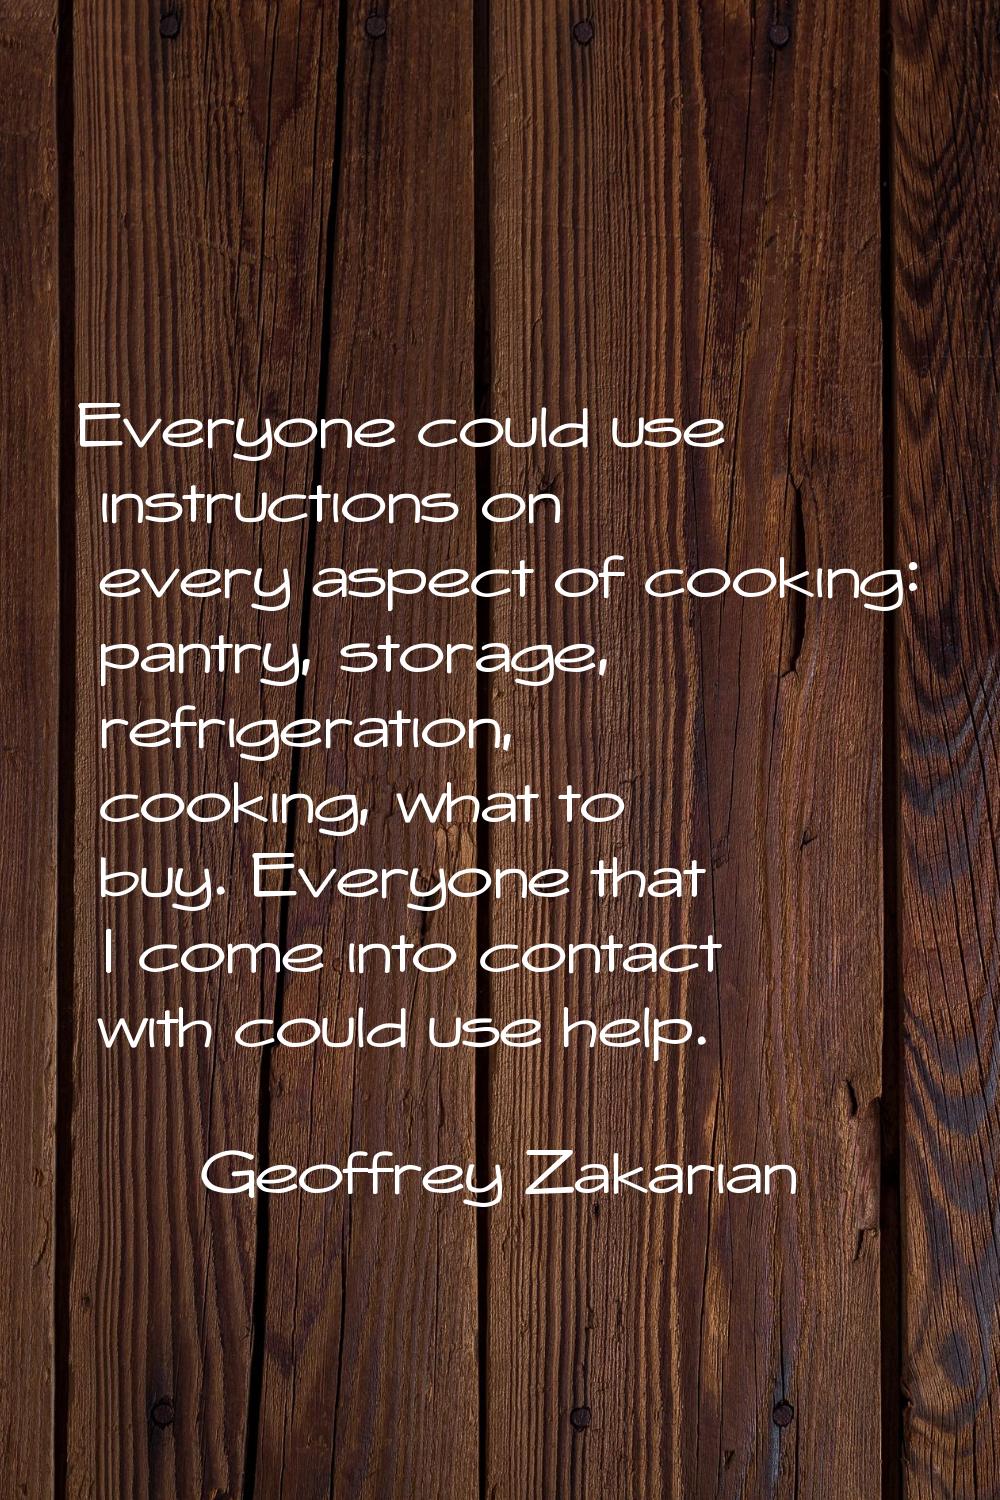 Everyone could use instructions on every aspect of cooking: pantry, storage, refrigeration, cooking